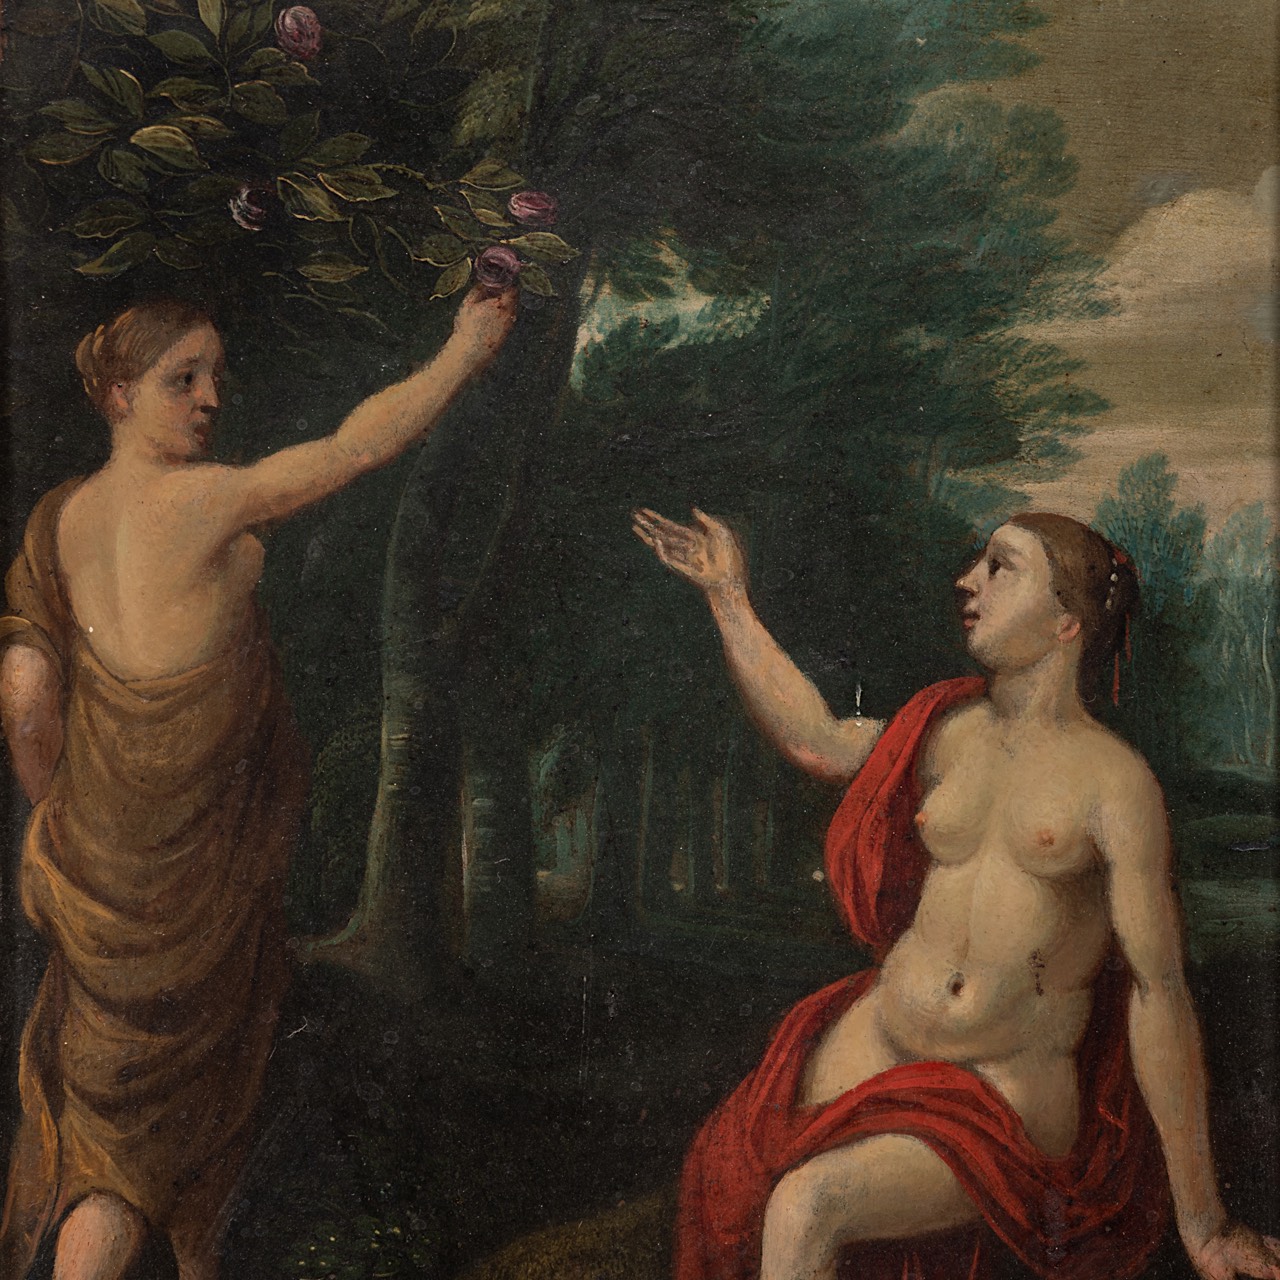 Two female Antique figures in a wooded landscape, Antwerp School, 17thC, oil on copper 21 x 16 cm. ( - Image 4 of 5